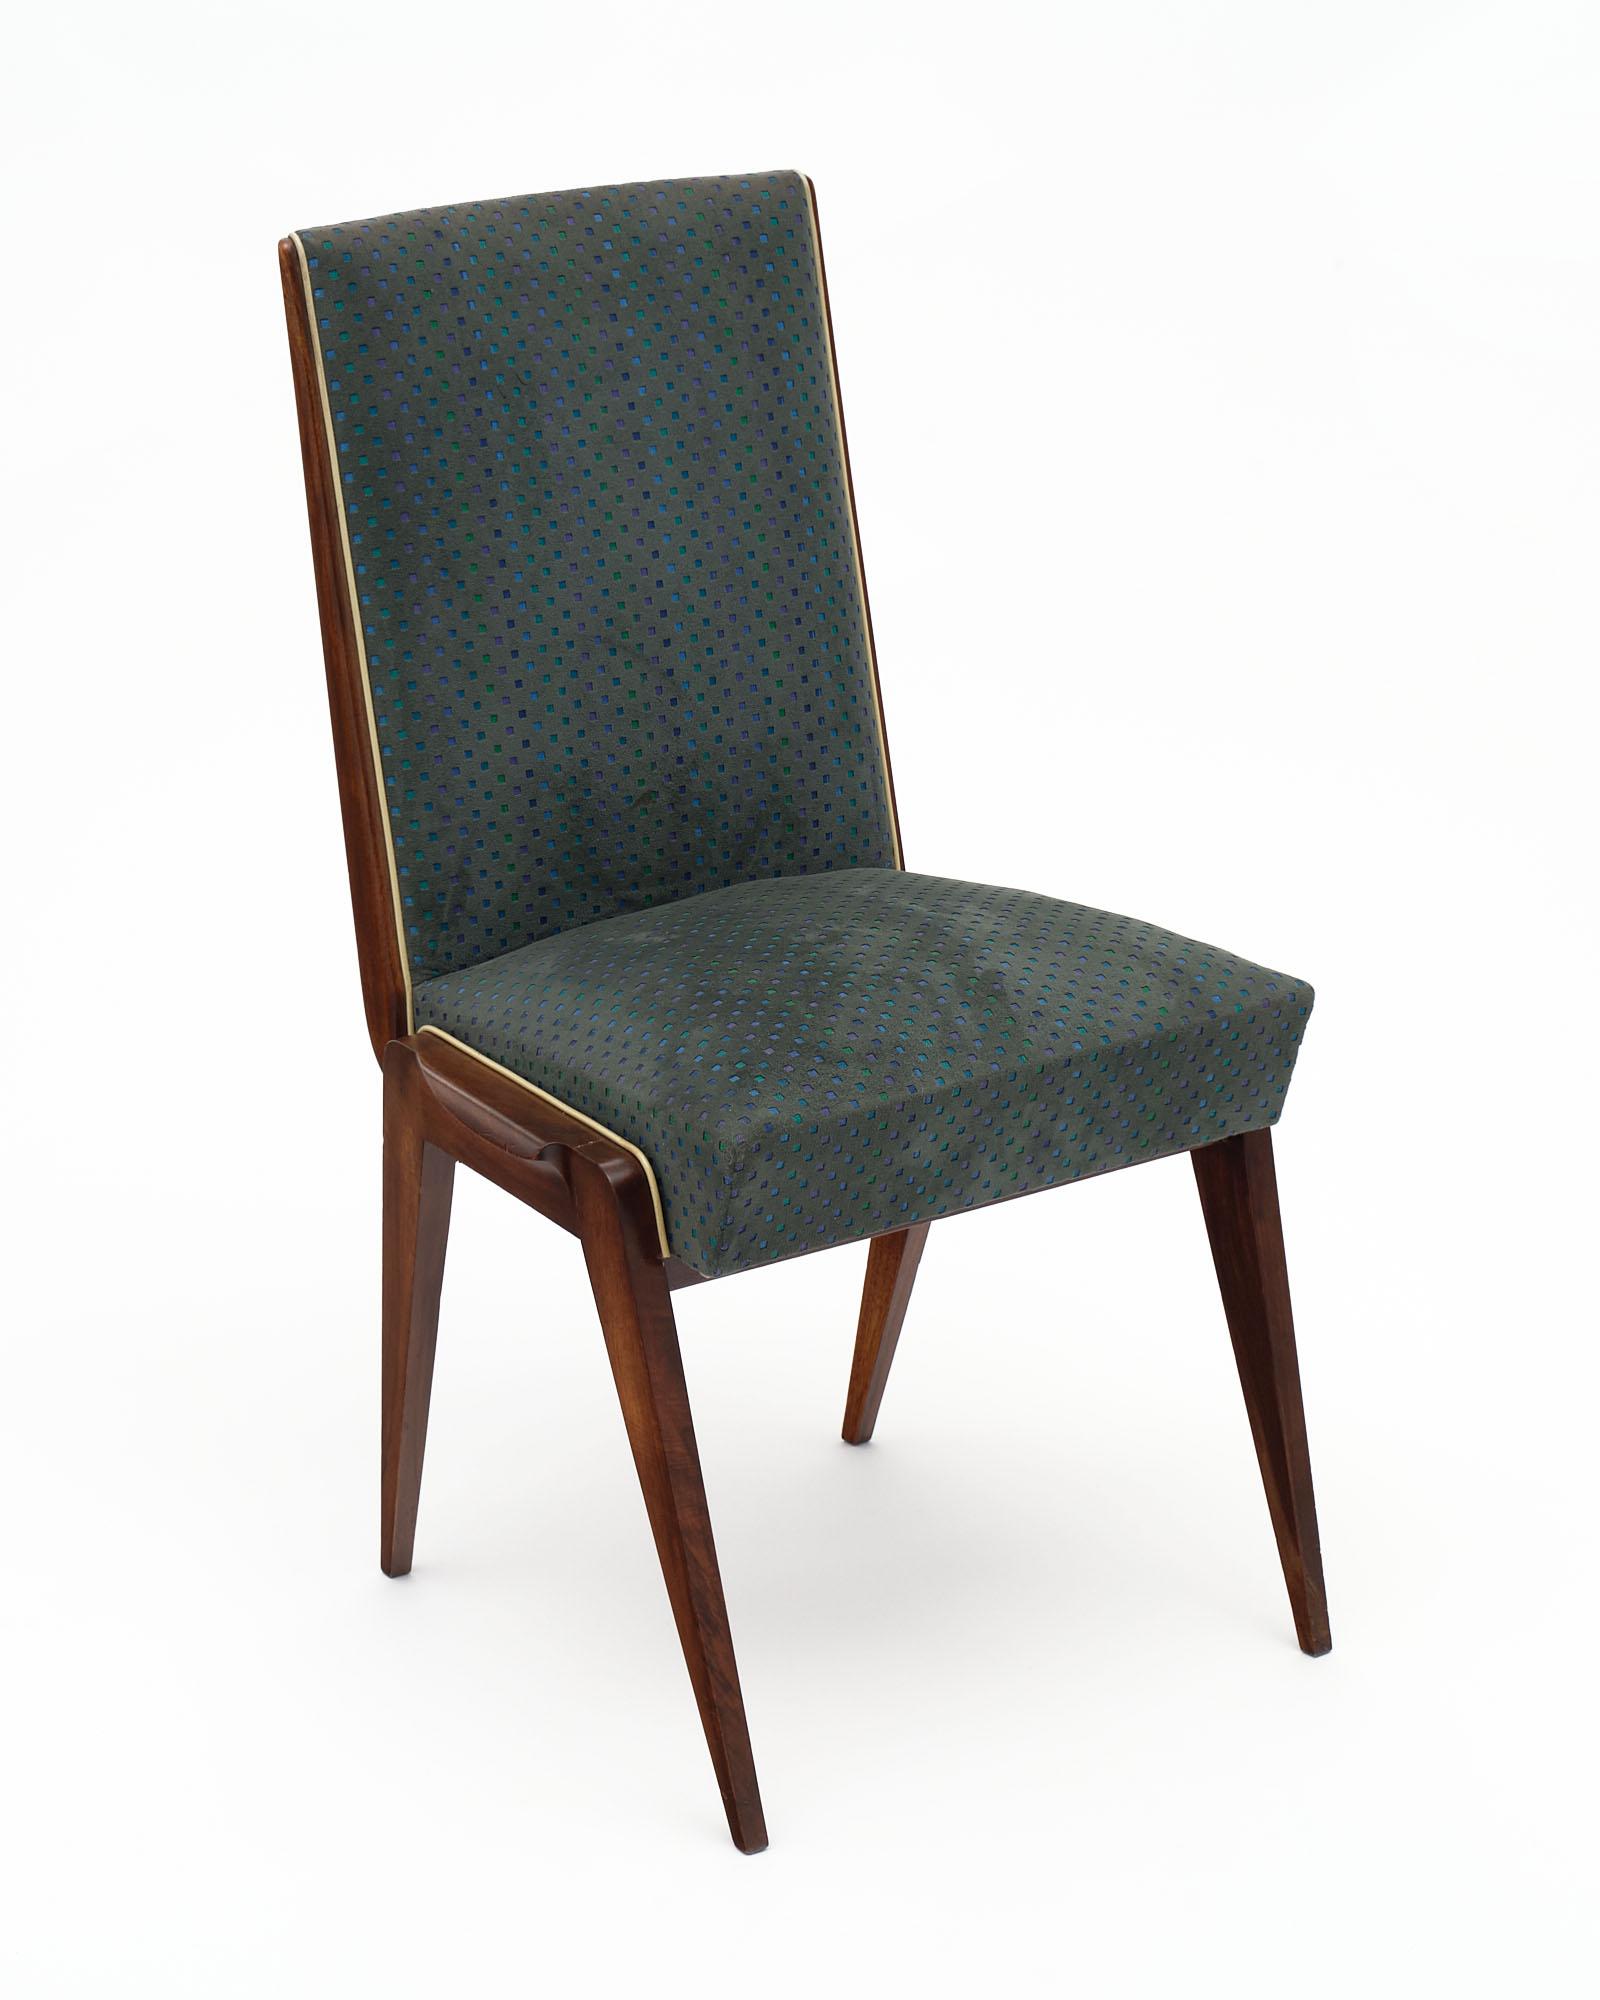 Set of six Italian Mid-Century Modern dinning room chairs. The frame of each chair is made of a strong solid walnut structure with tapered legs. These feature original turquoise and green velvet blend upholstery.